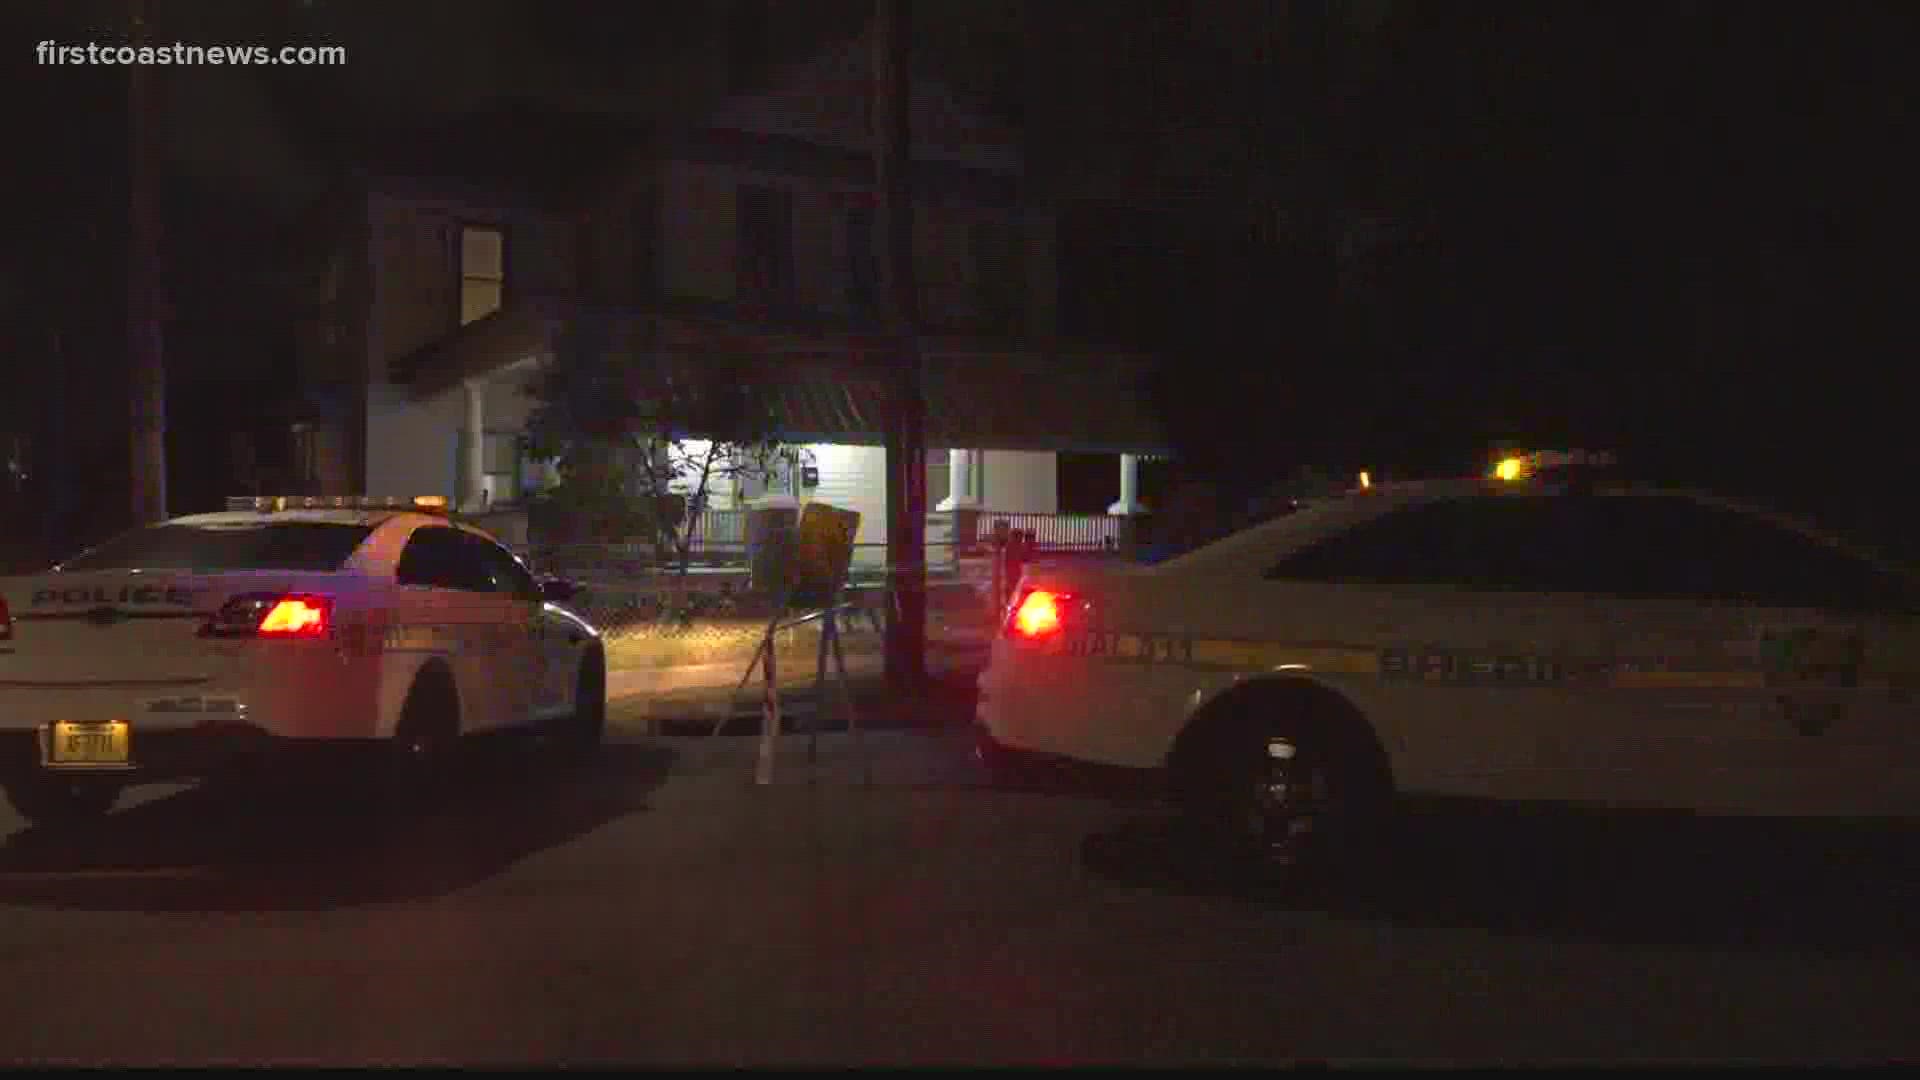 One of the victims has life-threatening injuries, while the other is expected to survive from his injuries, JSO said.